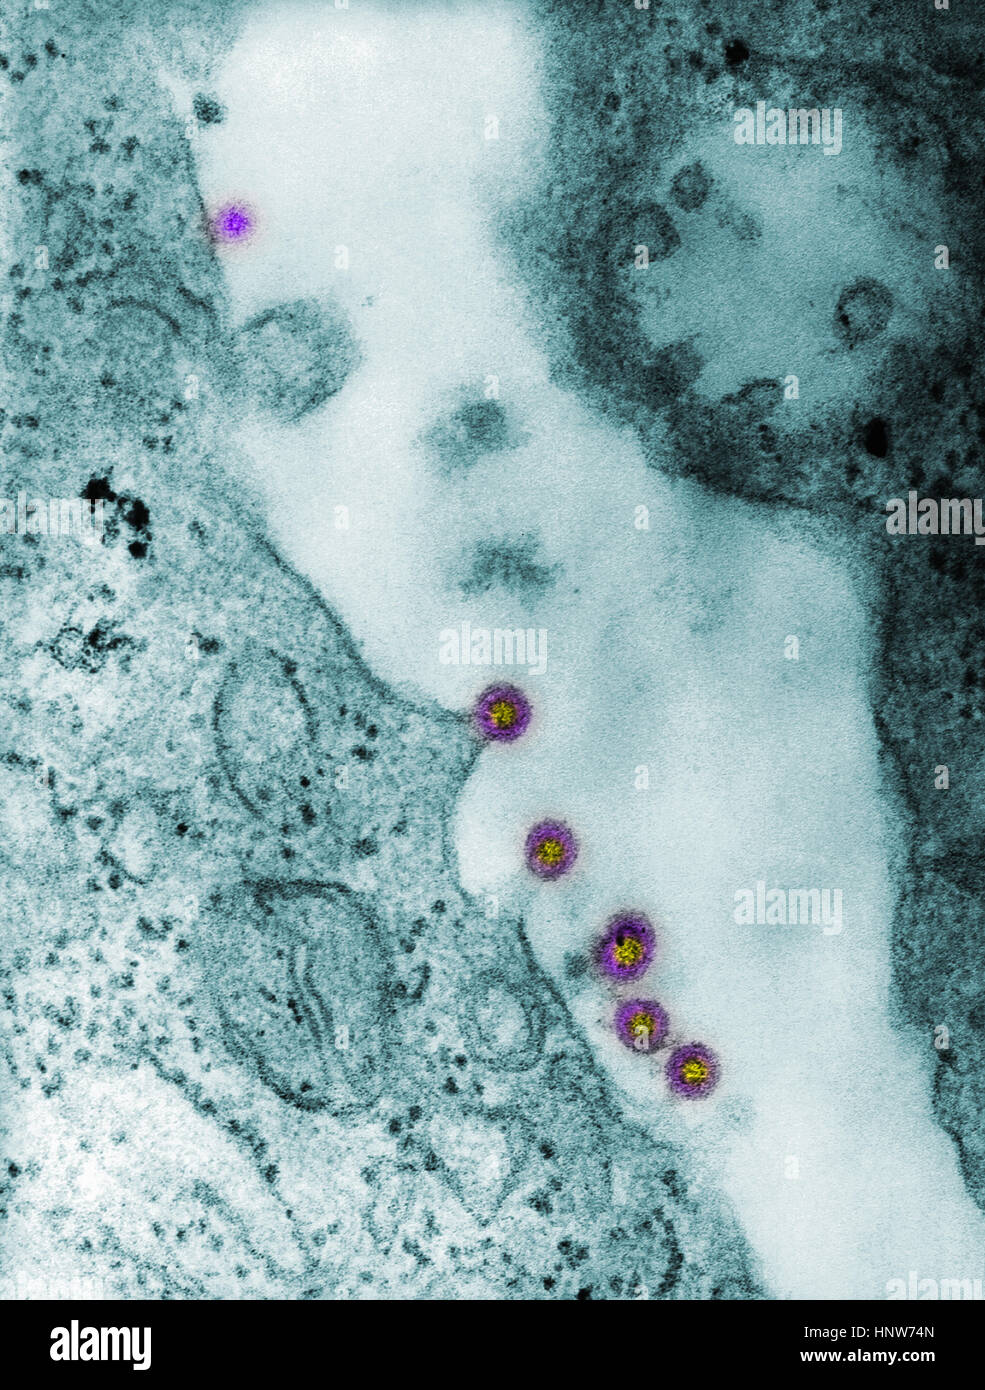 Full frame microscopic image of rubella virus virions budding from the host cell surface to be freed into the host’s system Stock Photo